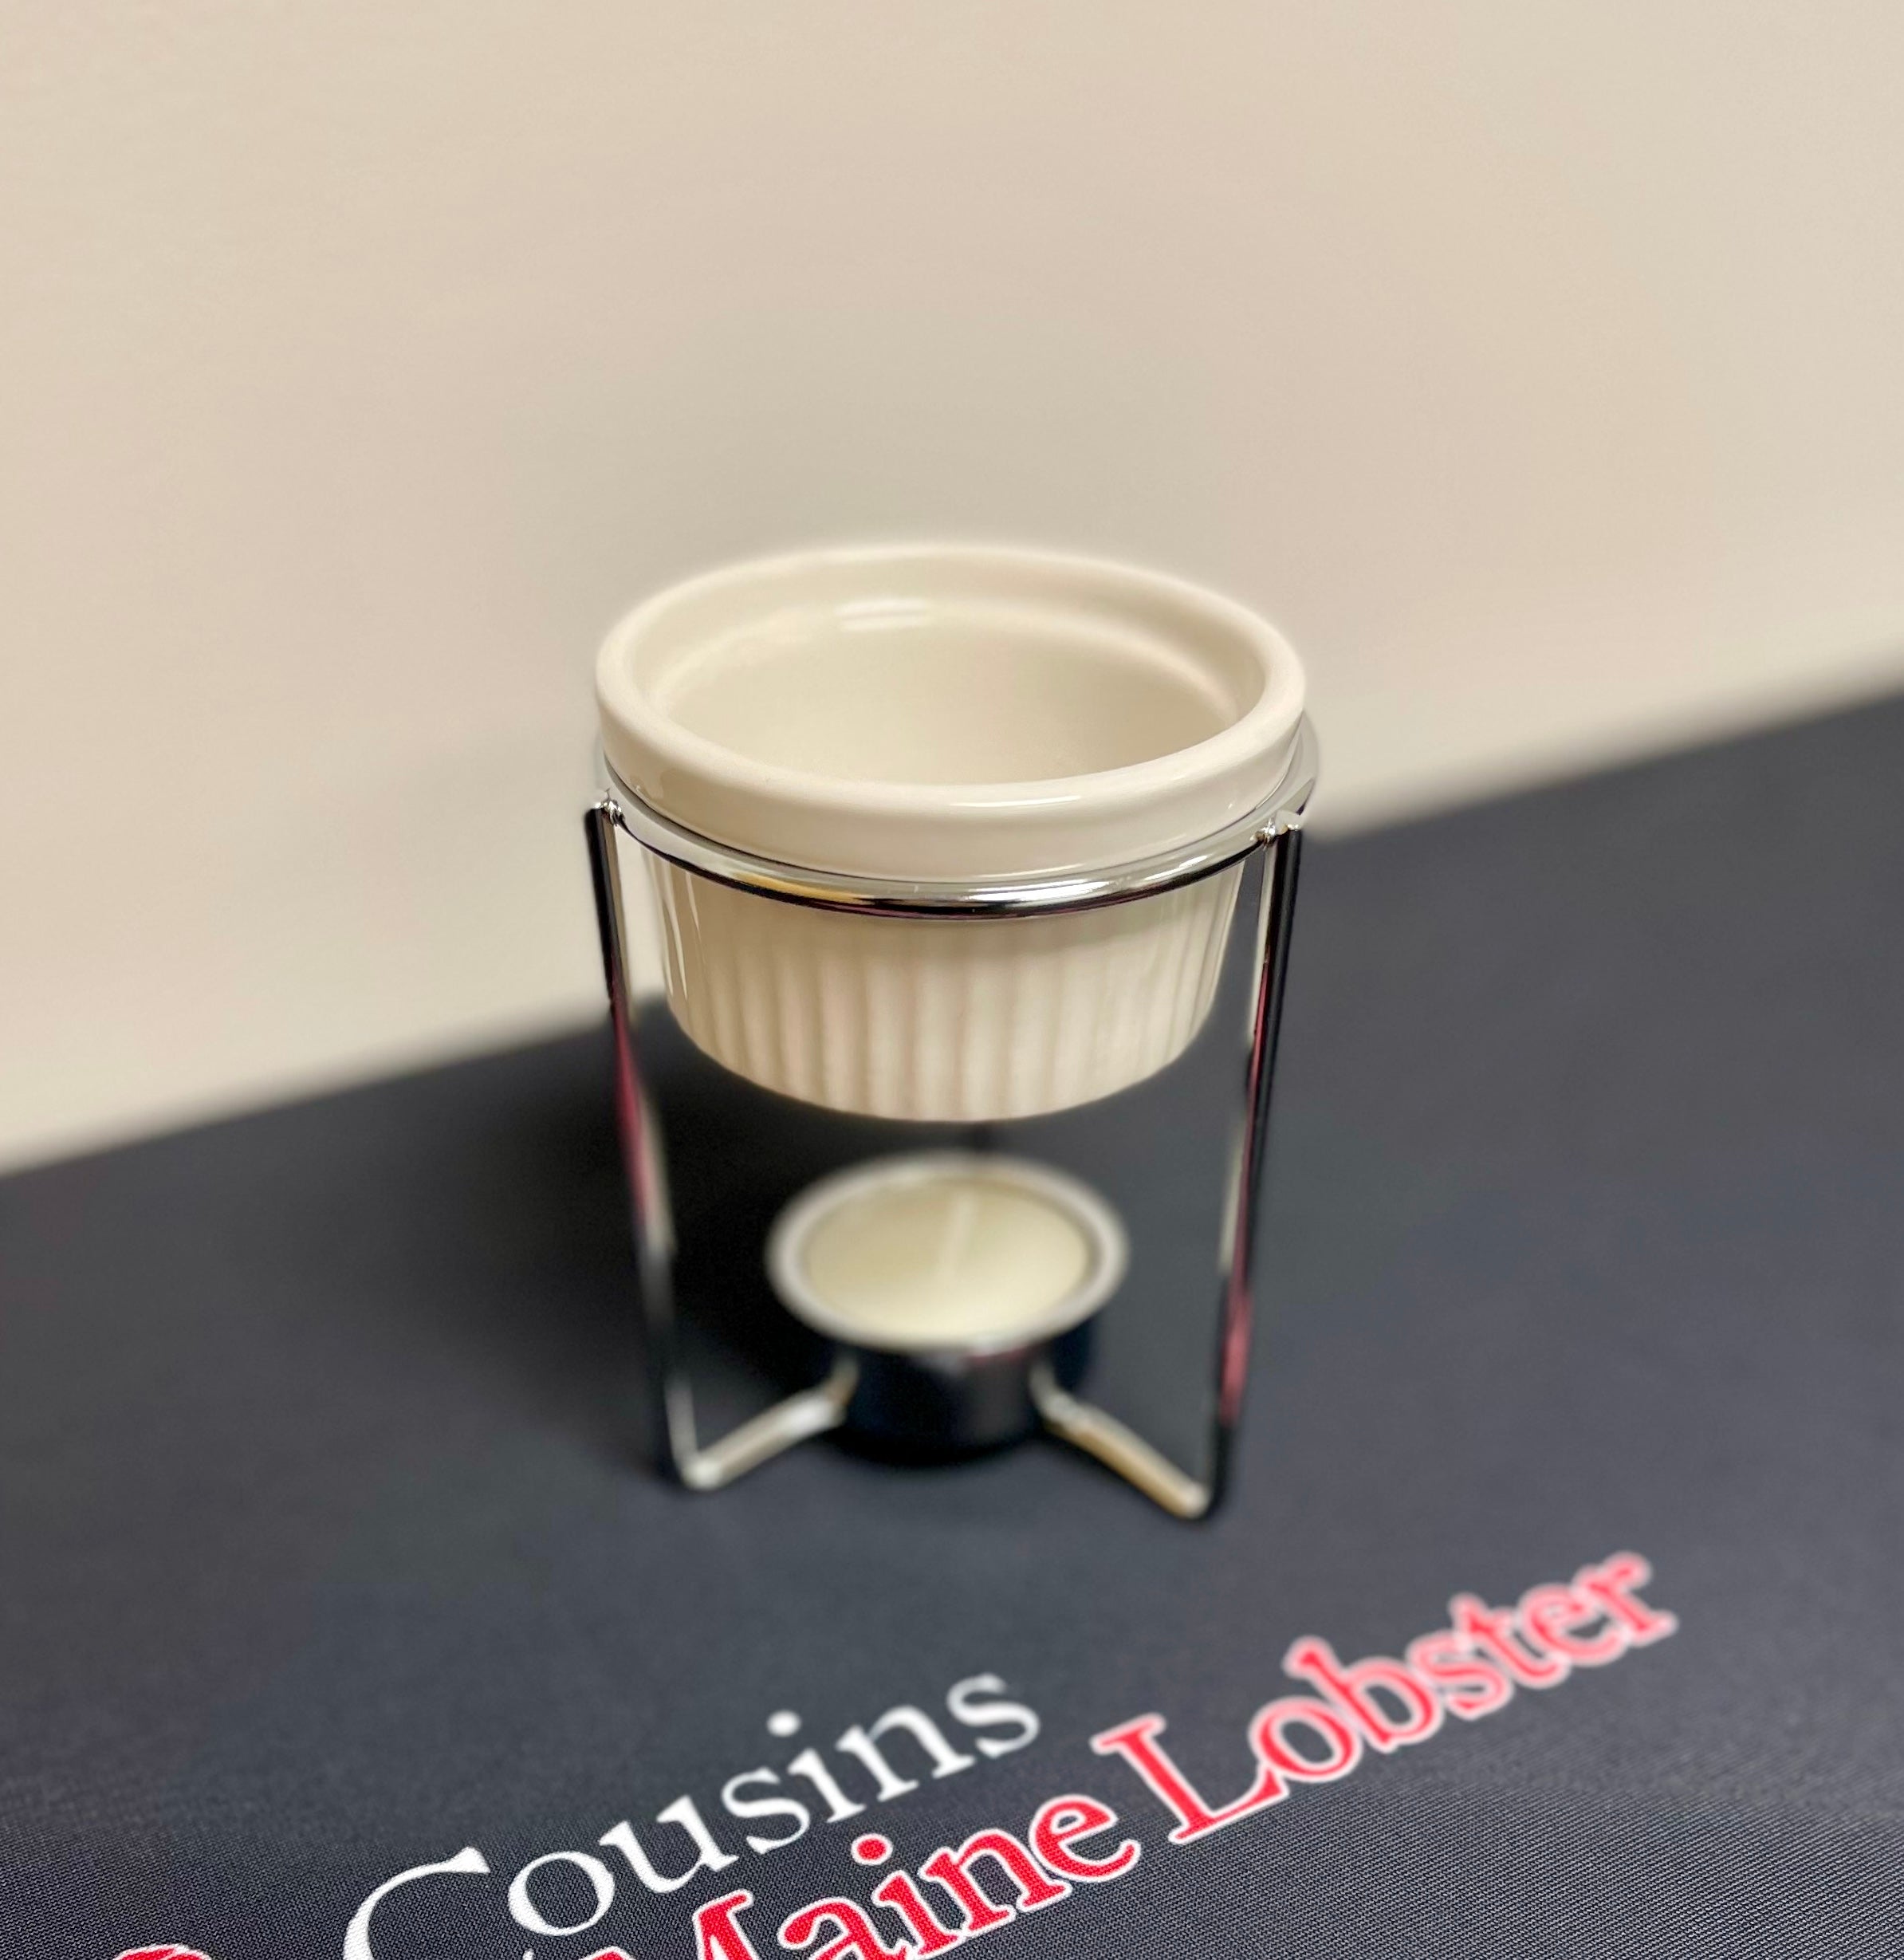 This photo shows the butter warmer which is used to keep your butter perfectly melted to be dipped in and enjoyed with your favorite meal from Cousins Maine Lobster